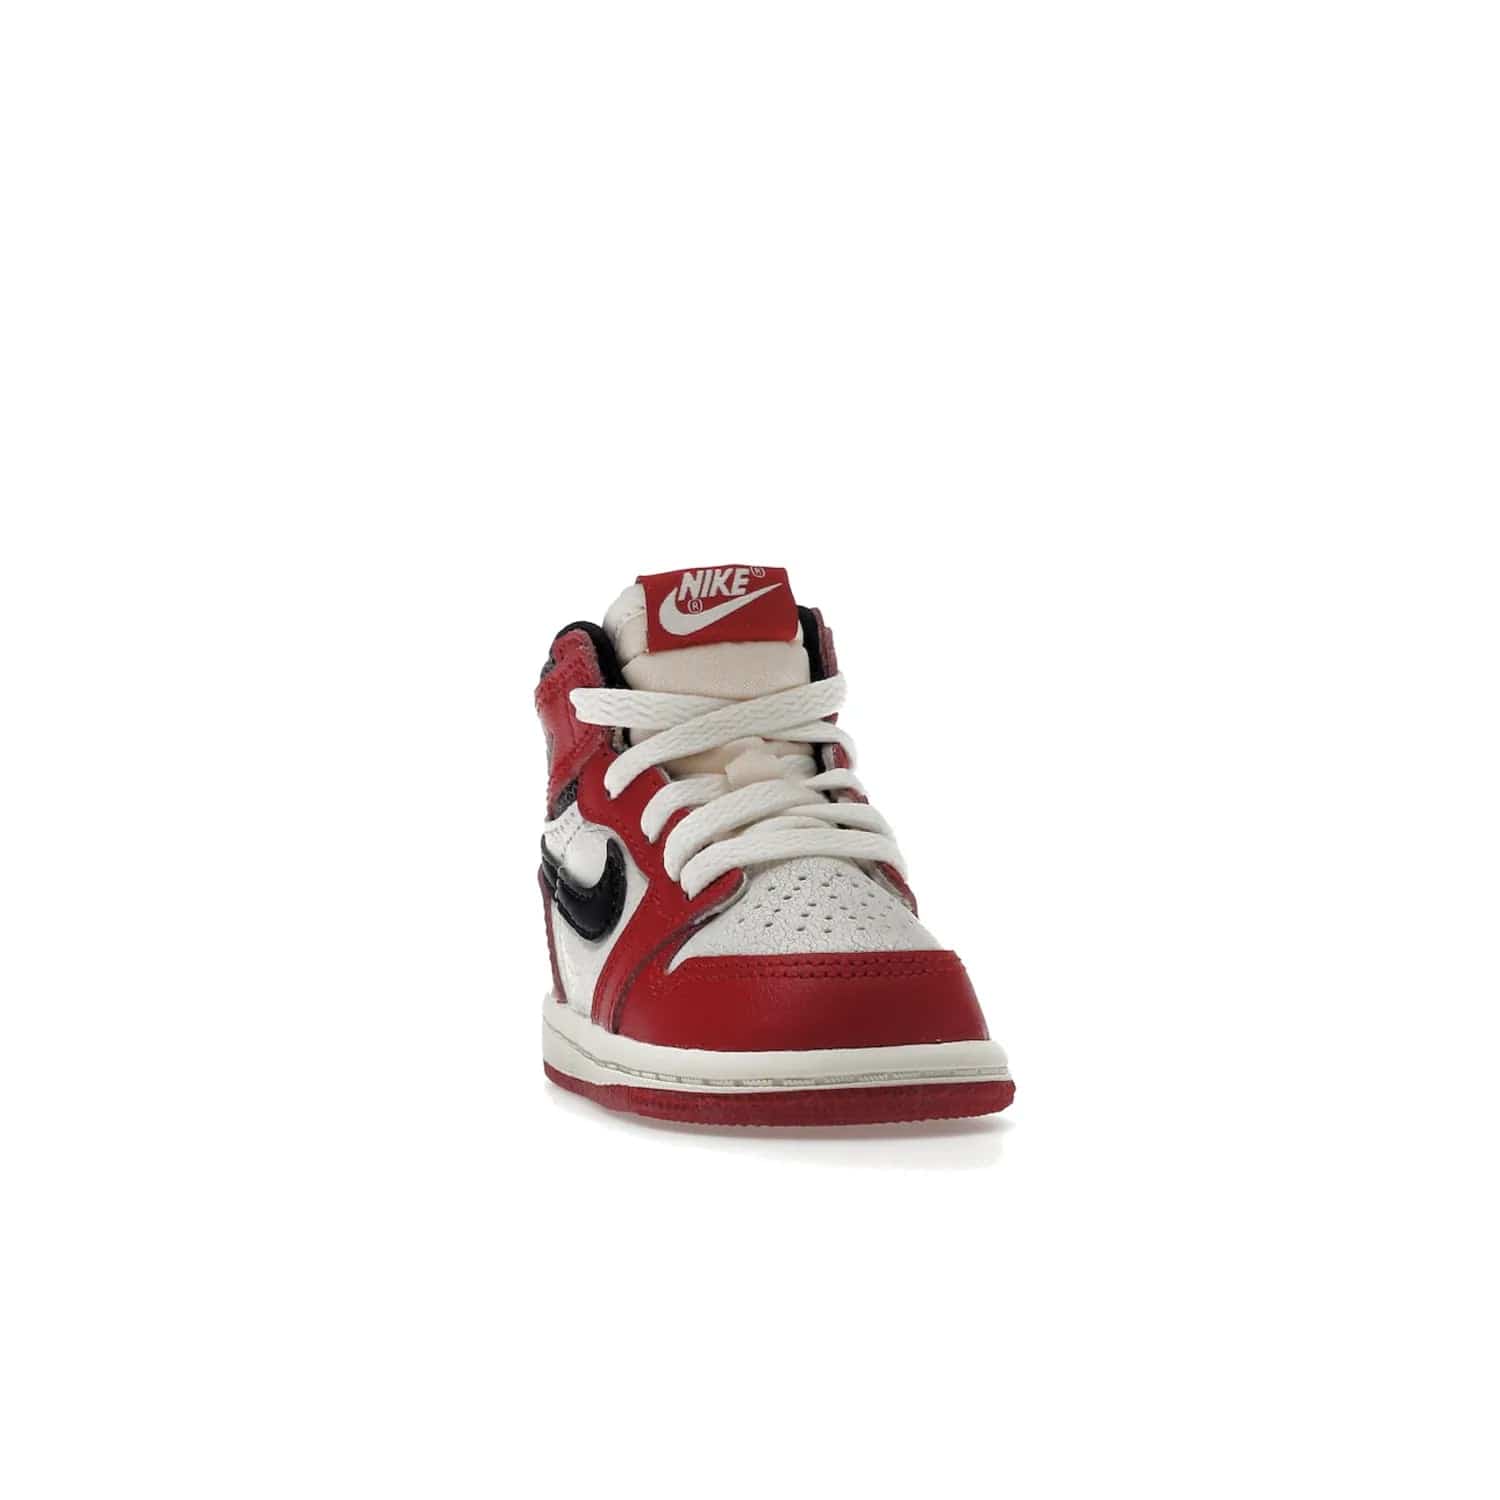 Jordan 1 Retro High OG Chicago Lost and Found (TD) - Image 8 - Only at www.BallersClubKickz.com - Introducing the Air Jordan 1 Retro High OG Lost and Found TD – a vibrant combination of 4 colors: muslin, varsity, sail and black. Featuring a crackled leather upper and AIR units for comfort and a signature Wings logo, these retro shoes add comfort and style for your little ones at $70. Get your pair before 19th December 2022!